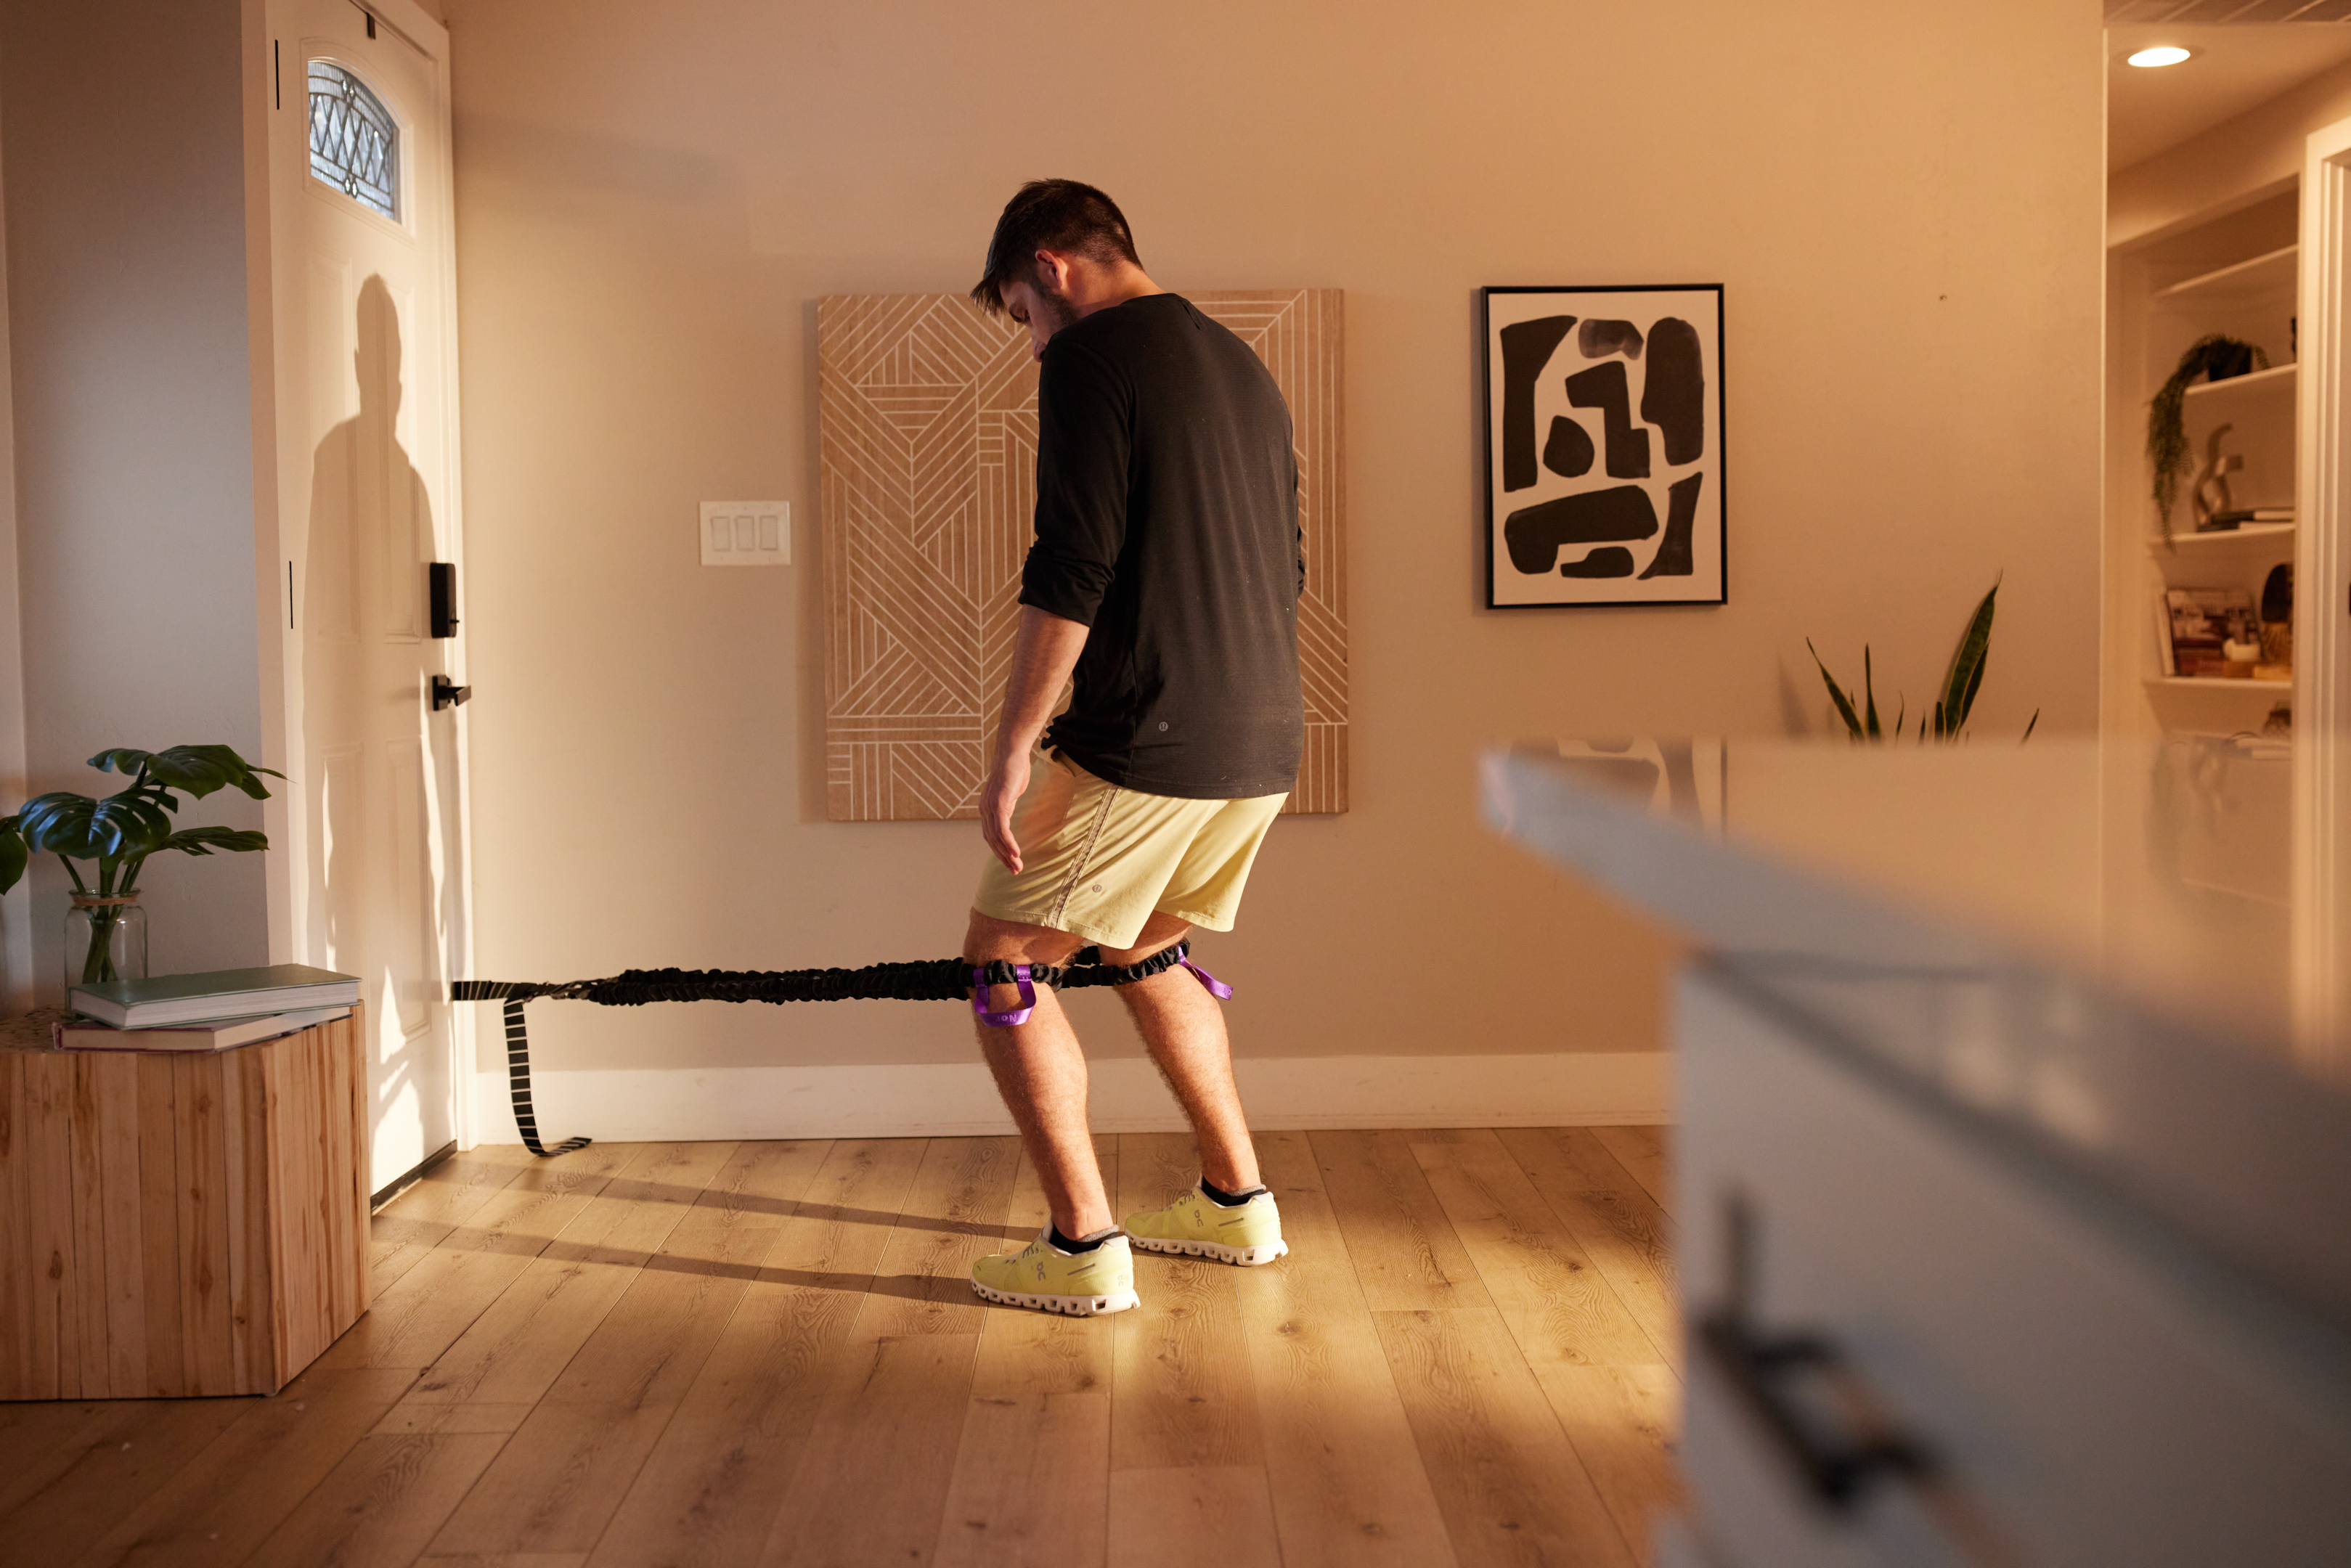 TKE is one of the best knee exercises that start from a straight leg position. With the help of the OmniBands, it sees your leg bent and your legs straight with your upper body relaxed.